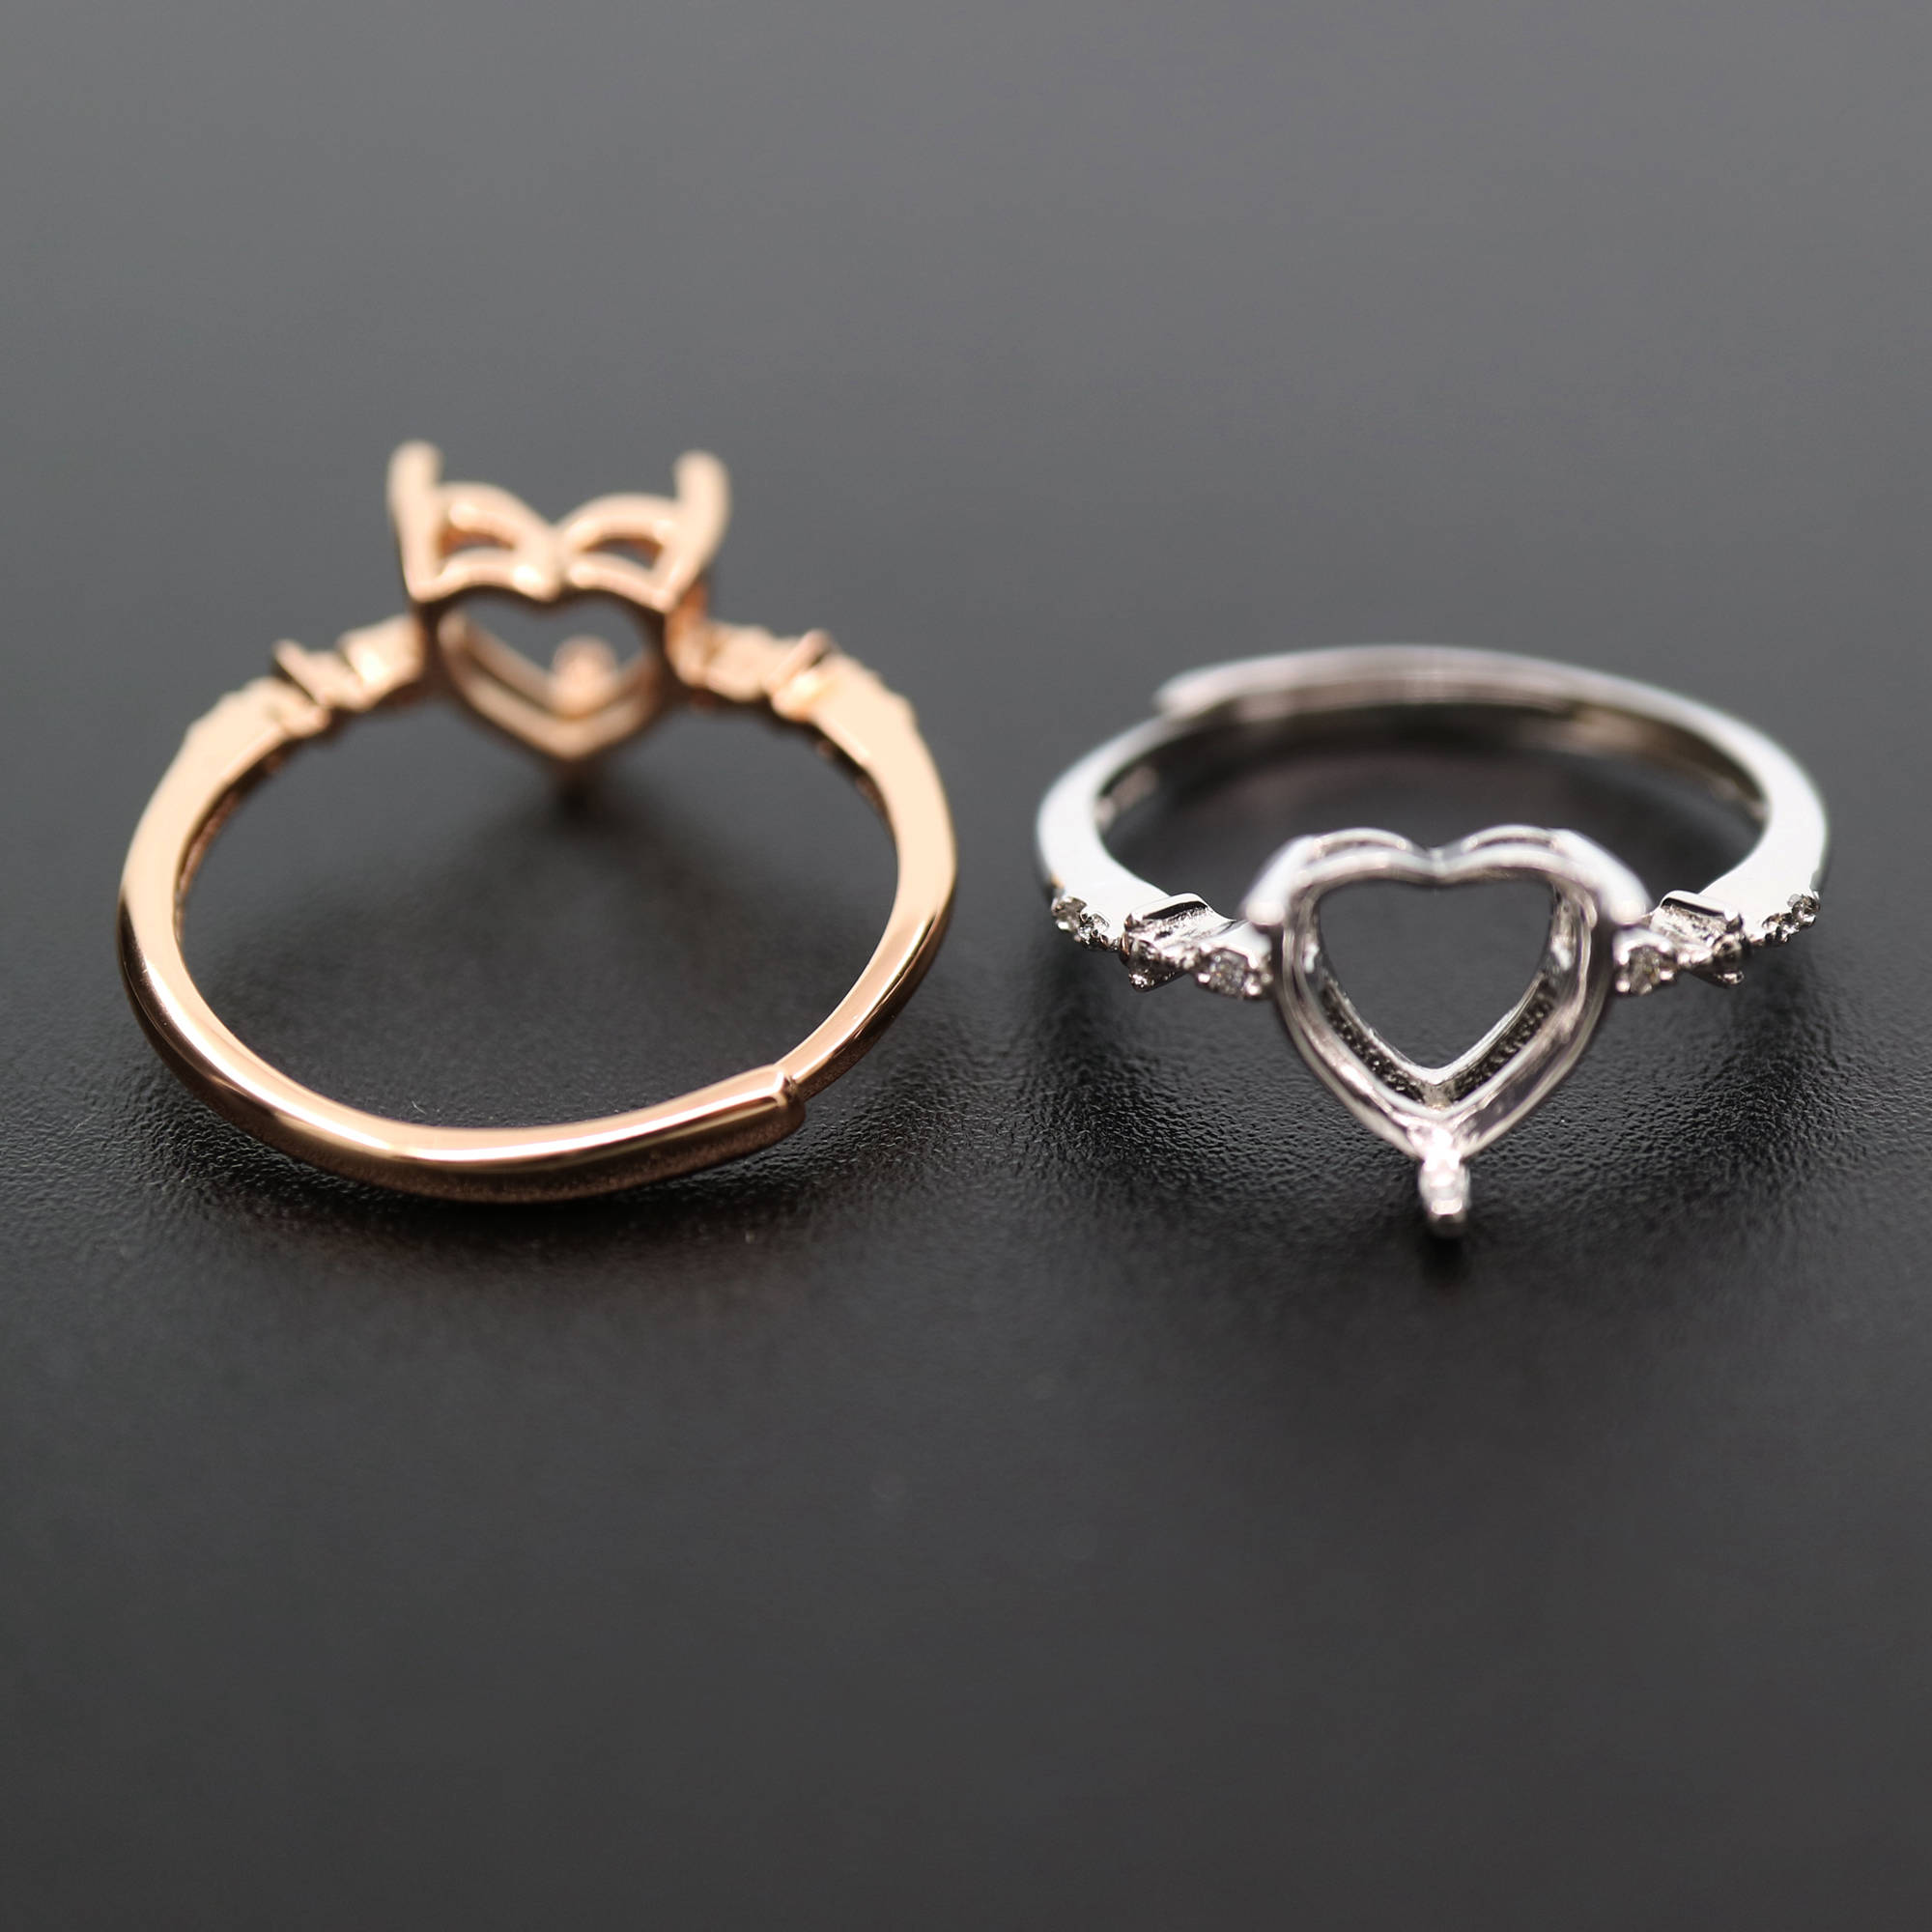 6-9MM heart shape bezel rose gold silver Gemstone CZ stone prong bezel solid 925 sterling silver adjustable ring settings 1294139 - Click Image to Close